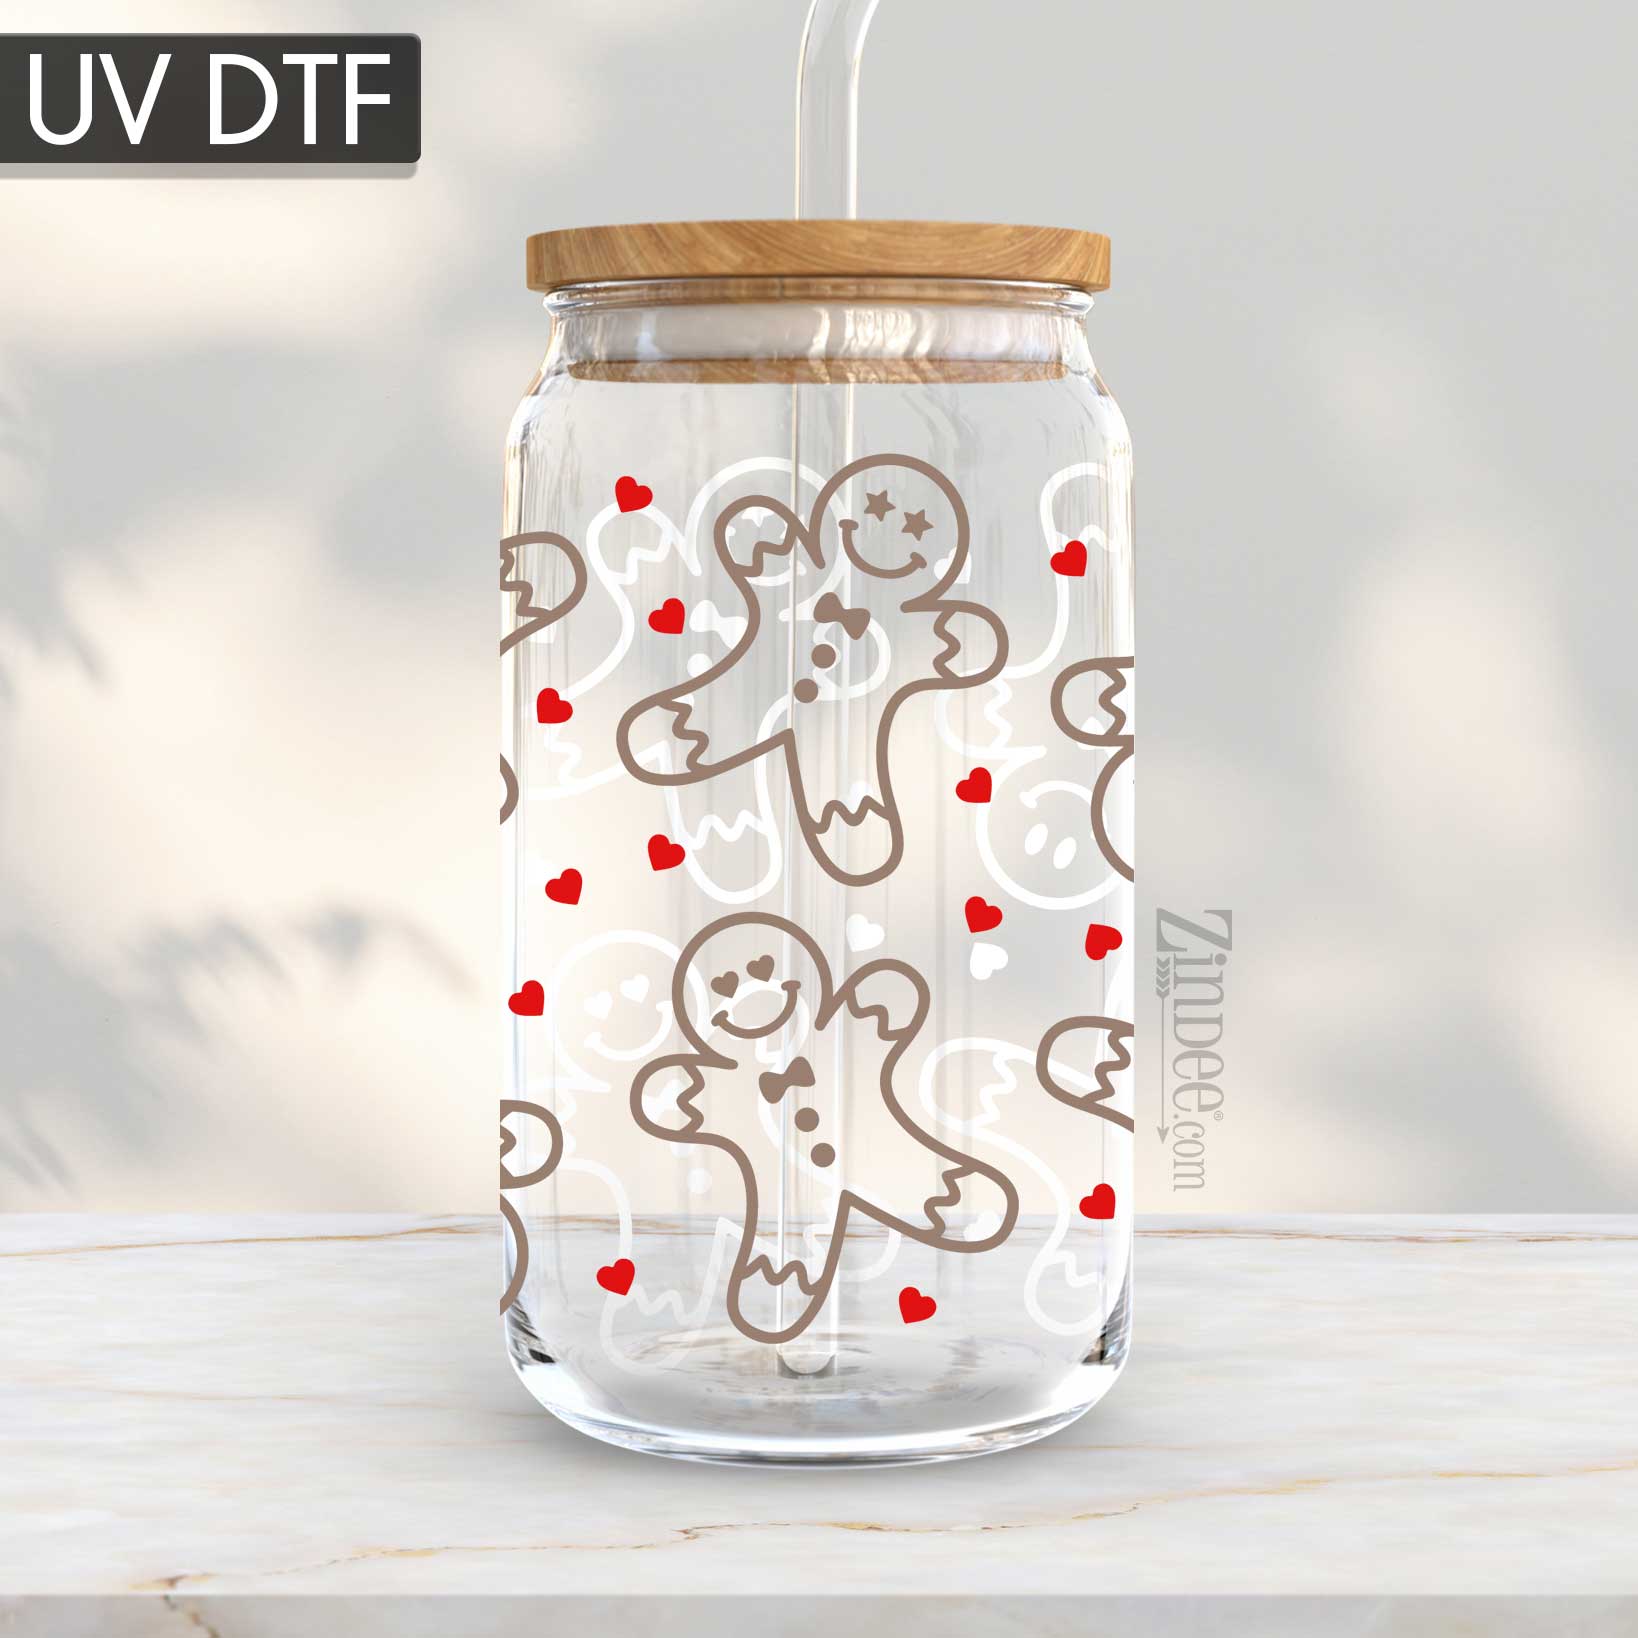 UV DTF Waterproof Cup Wrap Transfer Variety Pack That Includes Wraps. for  16 oz Libbey Glass Tumblers and Other Hard Surfaces (Mama Pack)